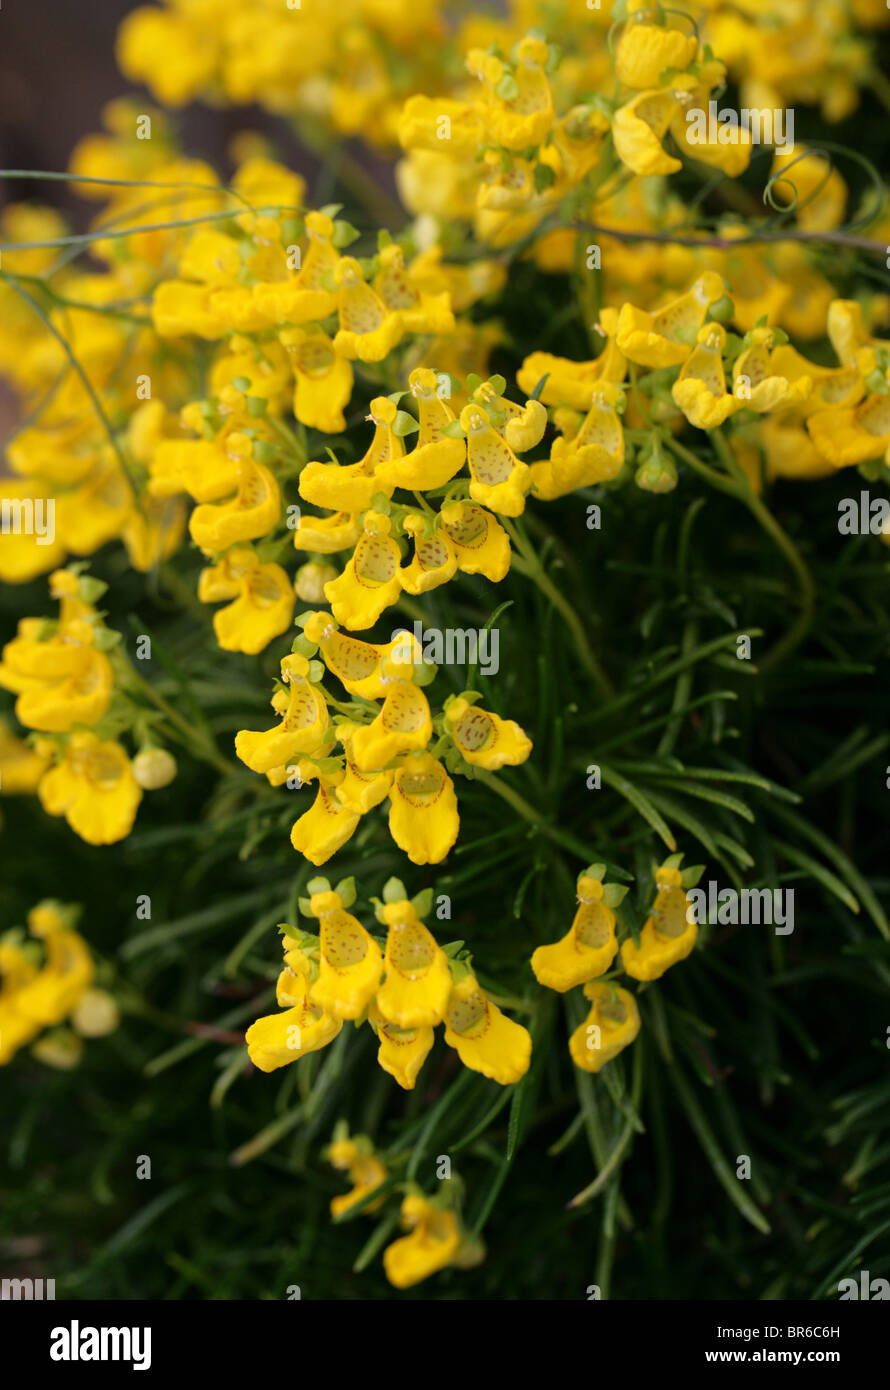 Pocketbook Plant, Slipper Flower or Slipperwort, Calceolaria pinifolia, Scrophulariaceae, Argentina, Chile, South America Stock Photo